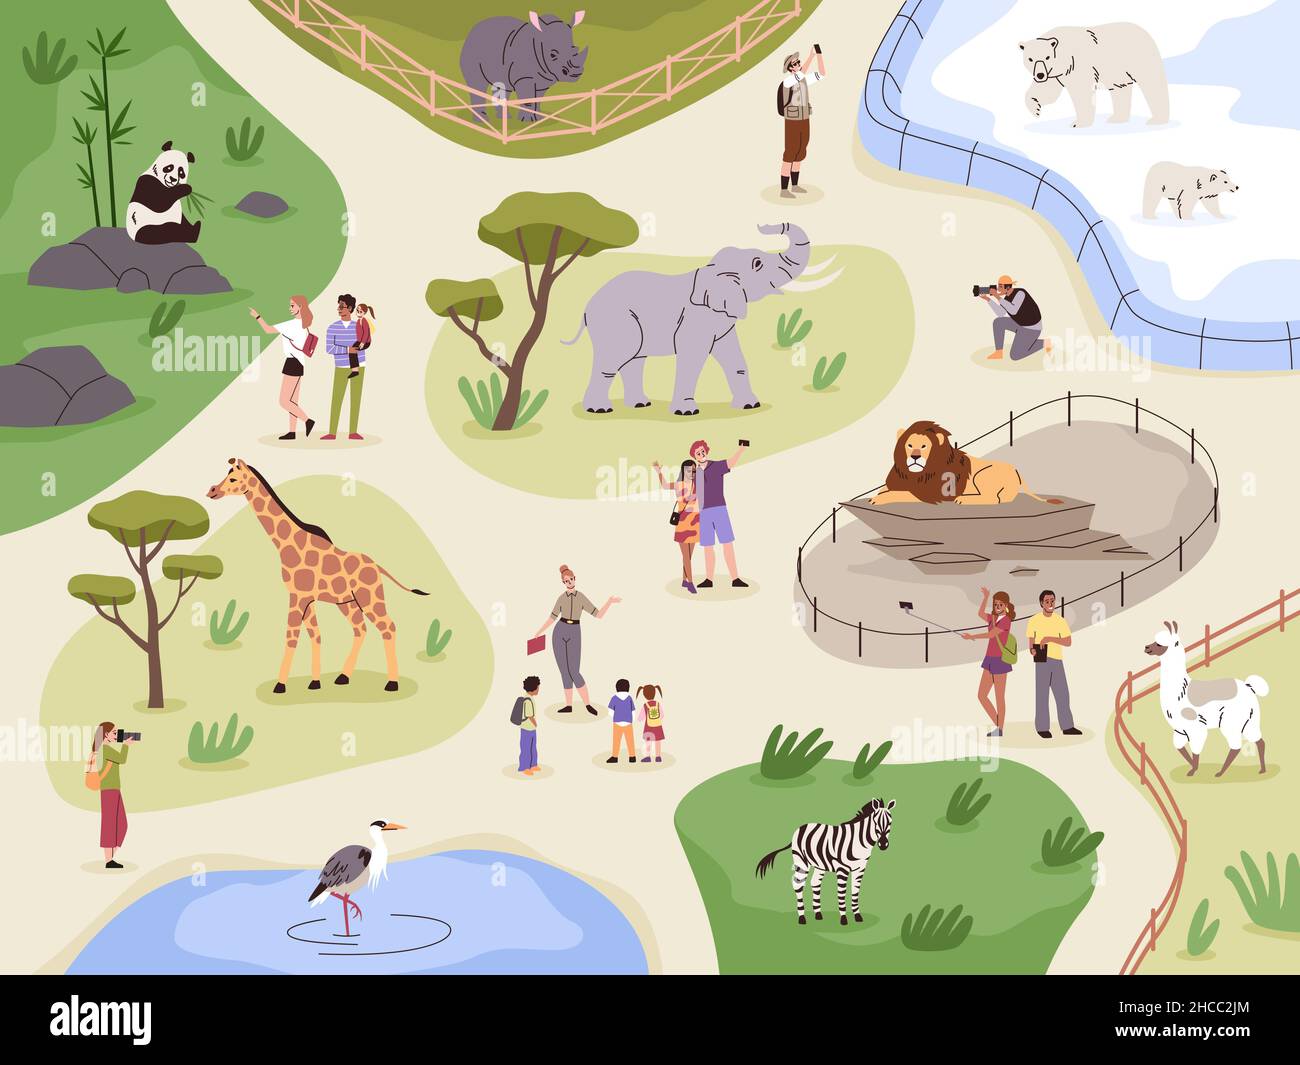 Zoo map. Animals safari park plan. Fenced enclosures with lion, llama and rhinoceros. People look at panda or giraffe. Visitors and guide on excursion Stock Vector